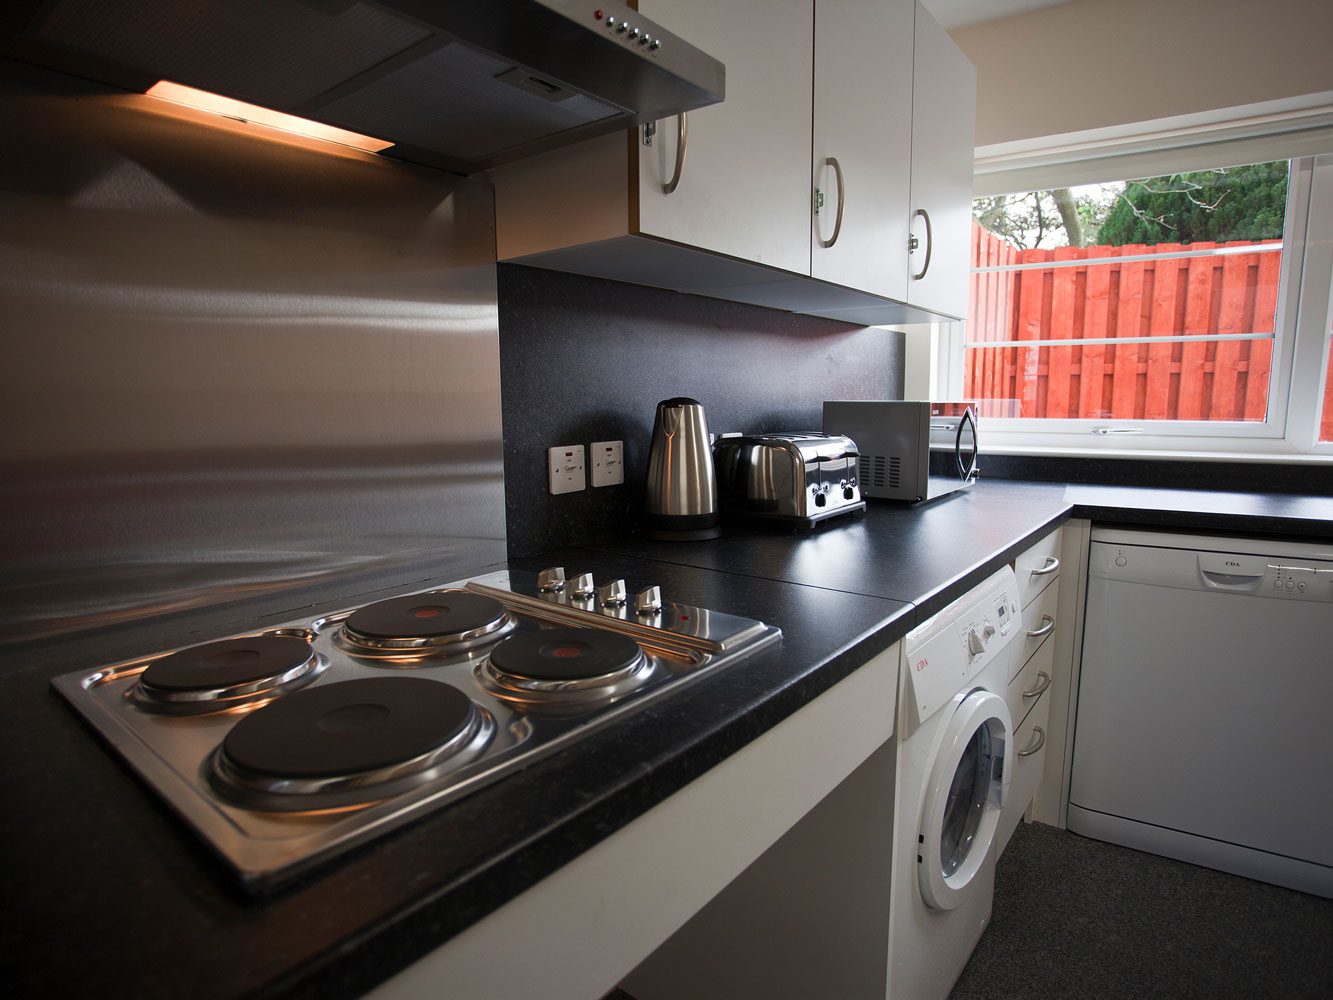 kitchen with hob, kettle, toaster, microwave, washing machine and dishwasher